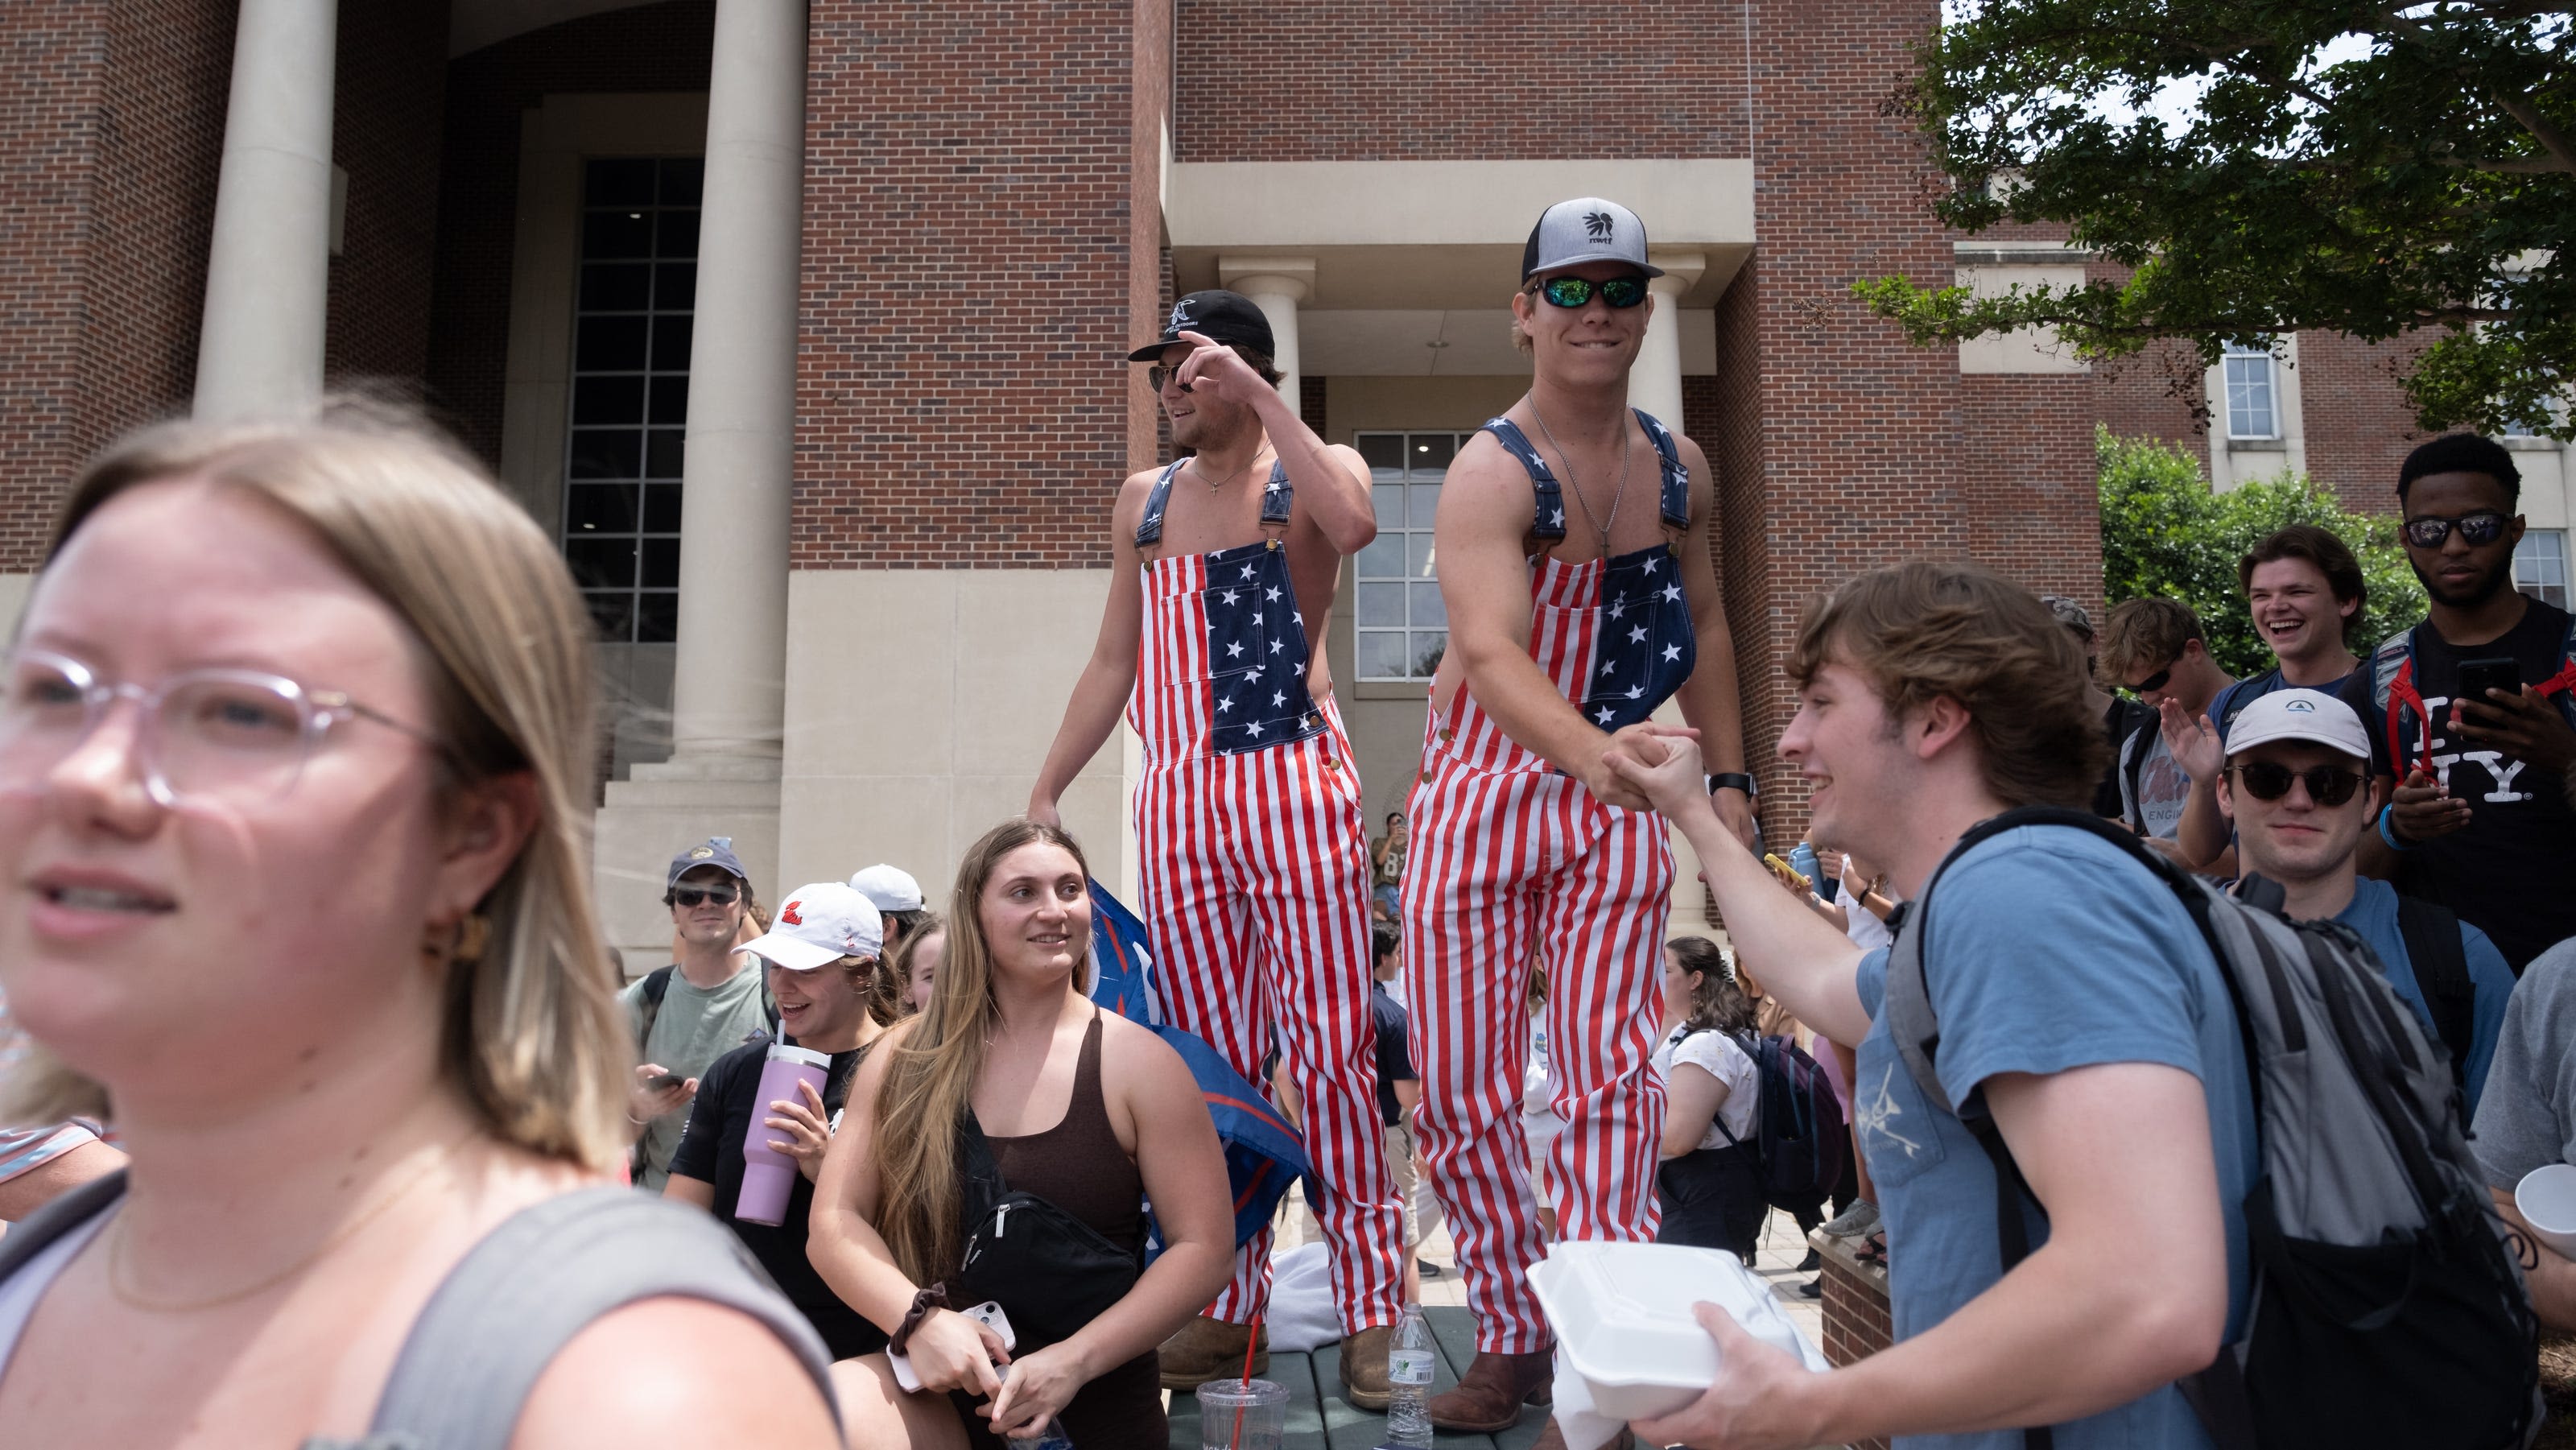 Photo of University of Mississippi students with 'Trump won' flag is altered | Fact check